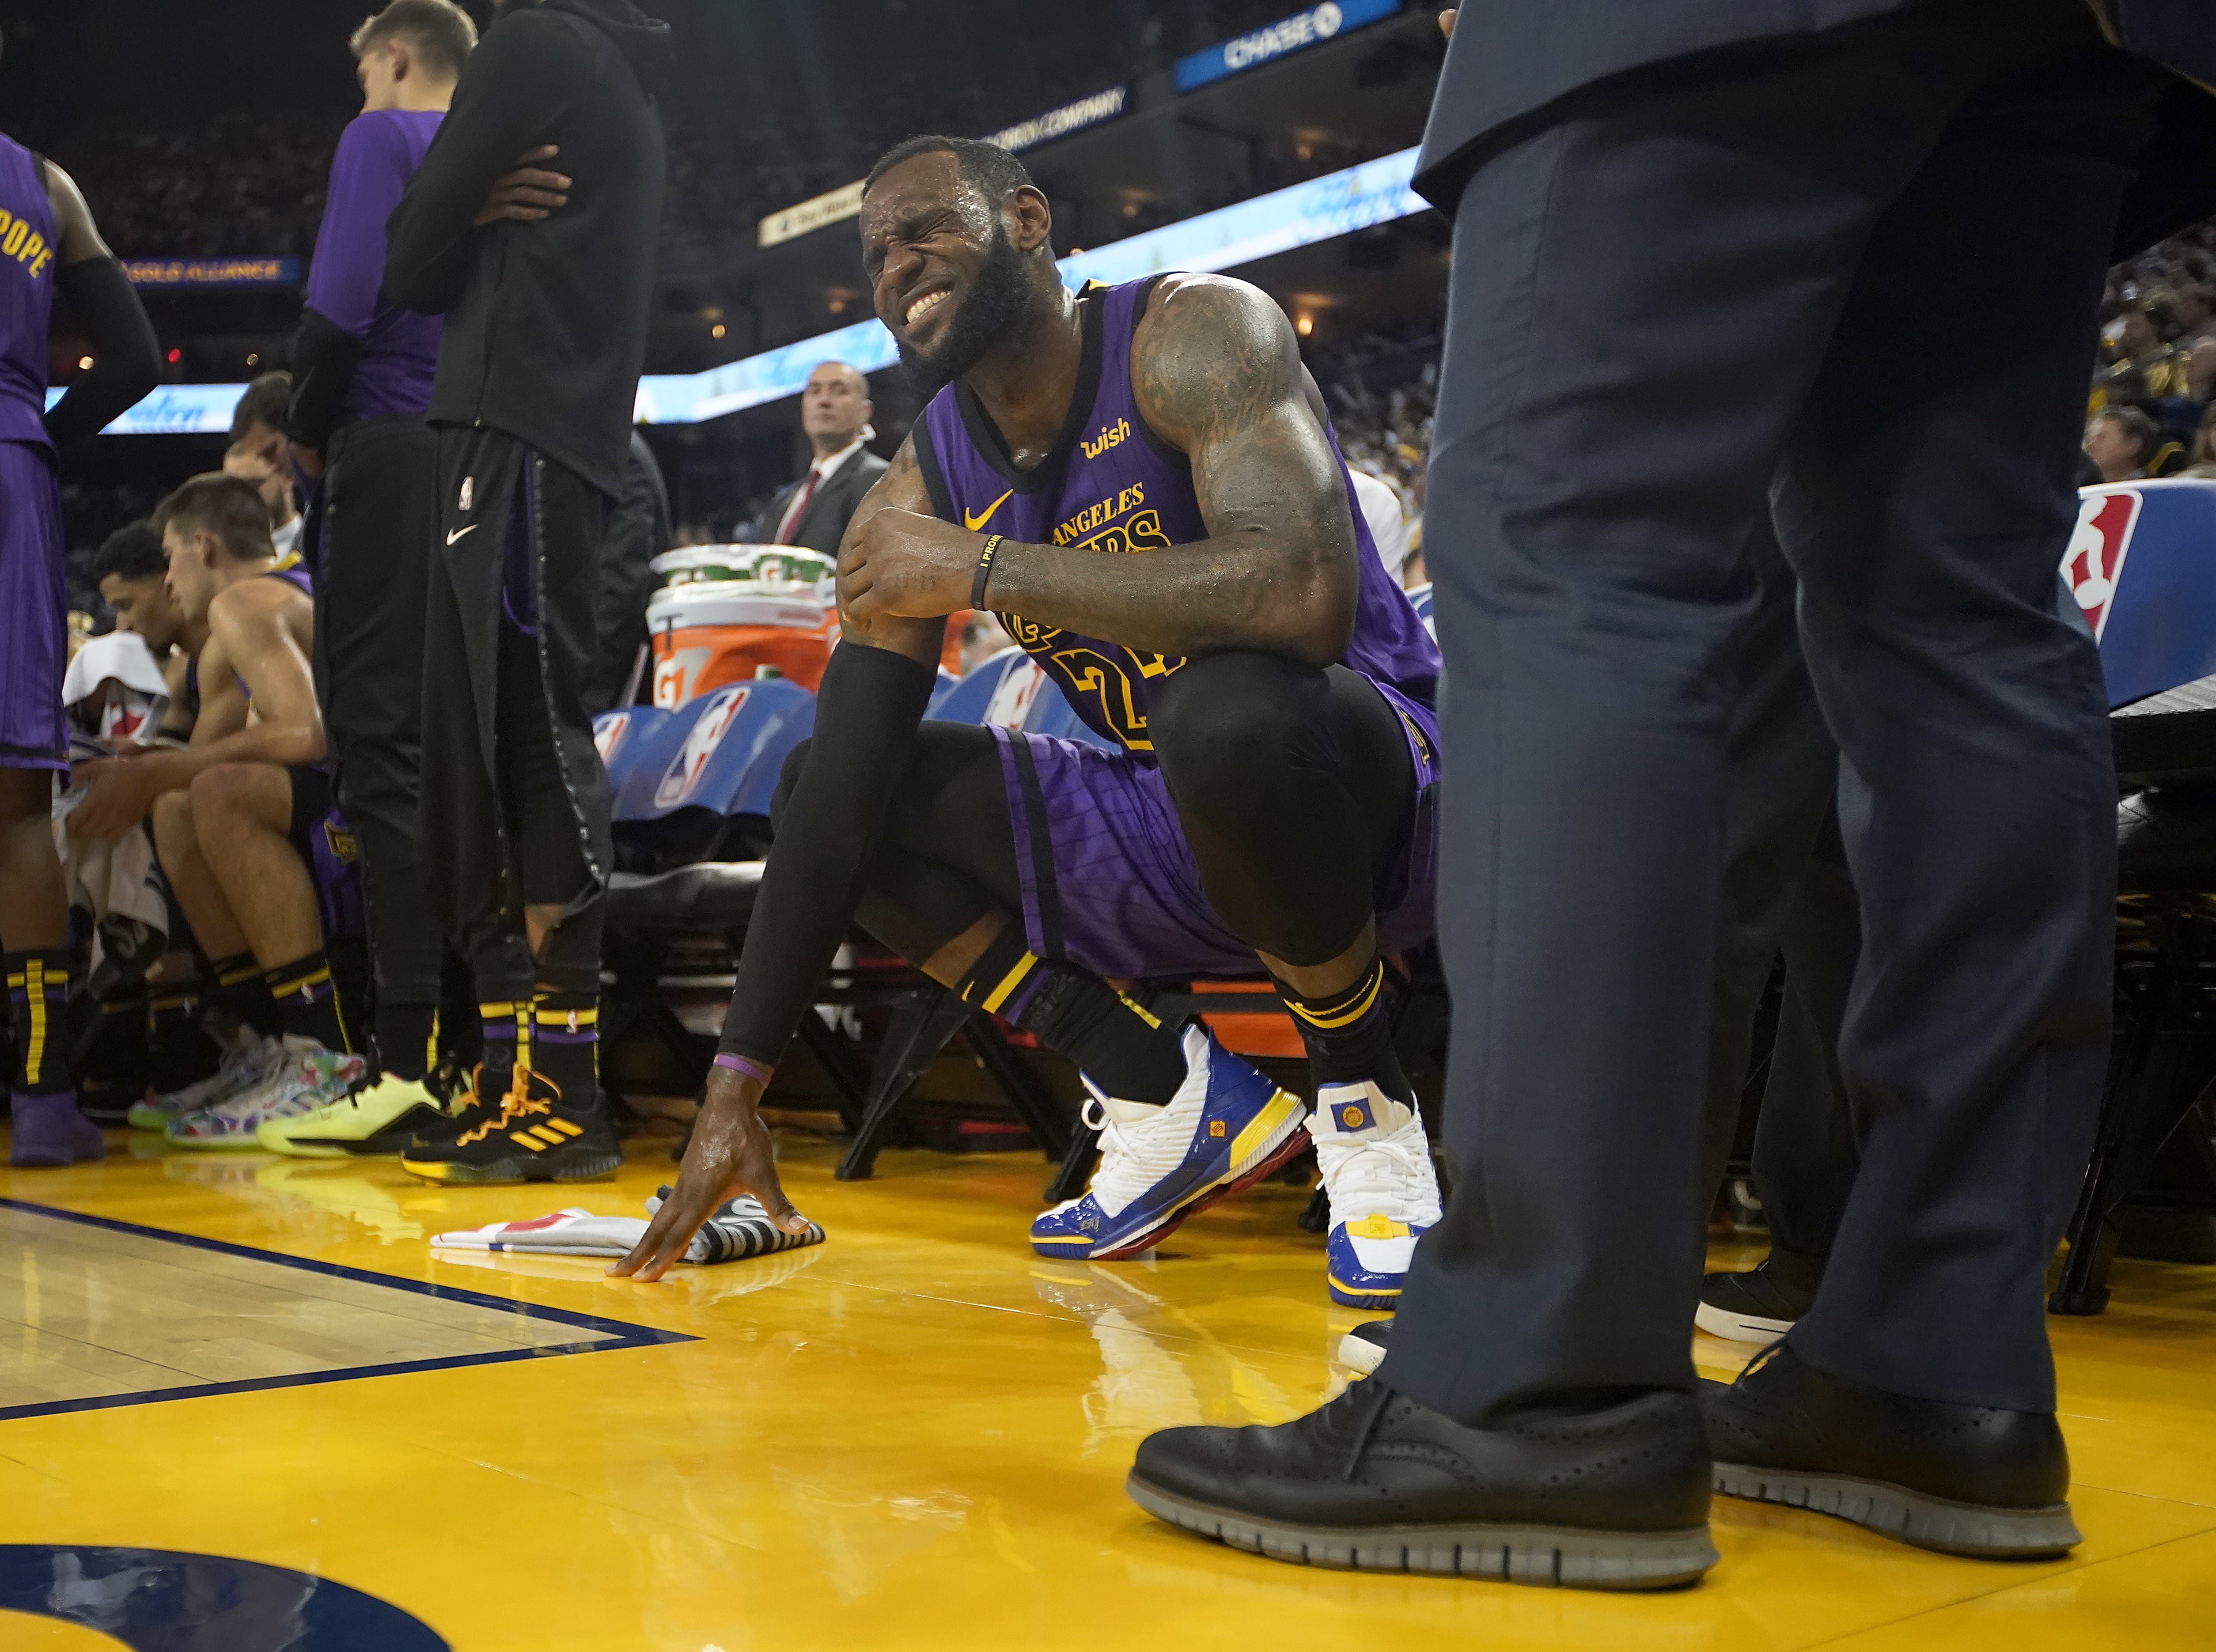 Los Angeles Lakers forward LeBron James (23) grimaces after straining his left groin, during the second half of the team's NBA basketball game against the Golden State Warriors on Tuesday, Dec. 25, 2018, in Oakland, Calif. The Lakers won 127-101.